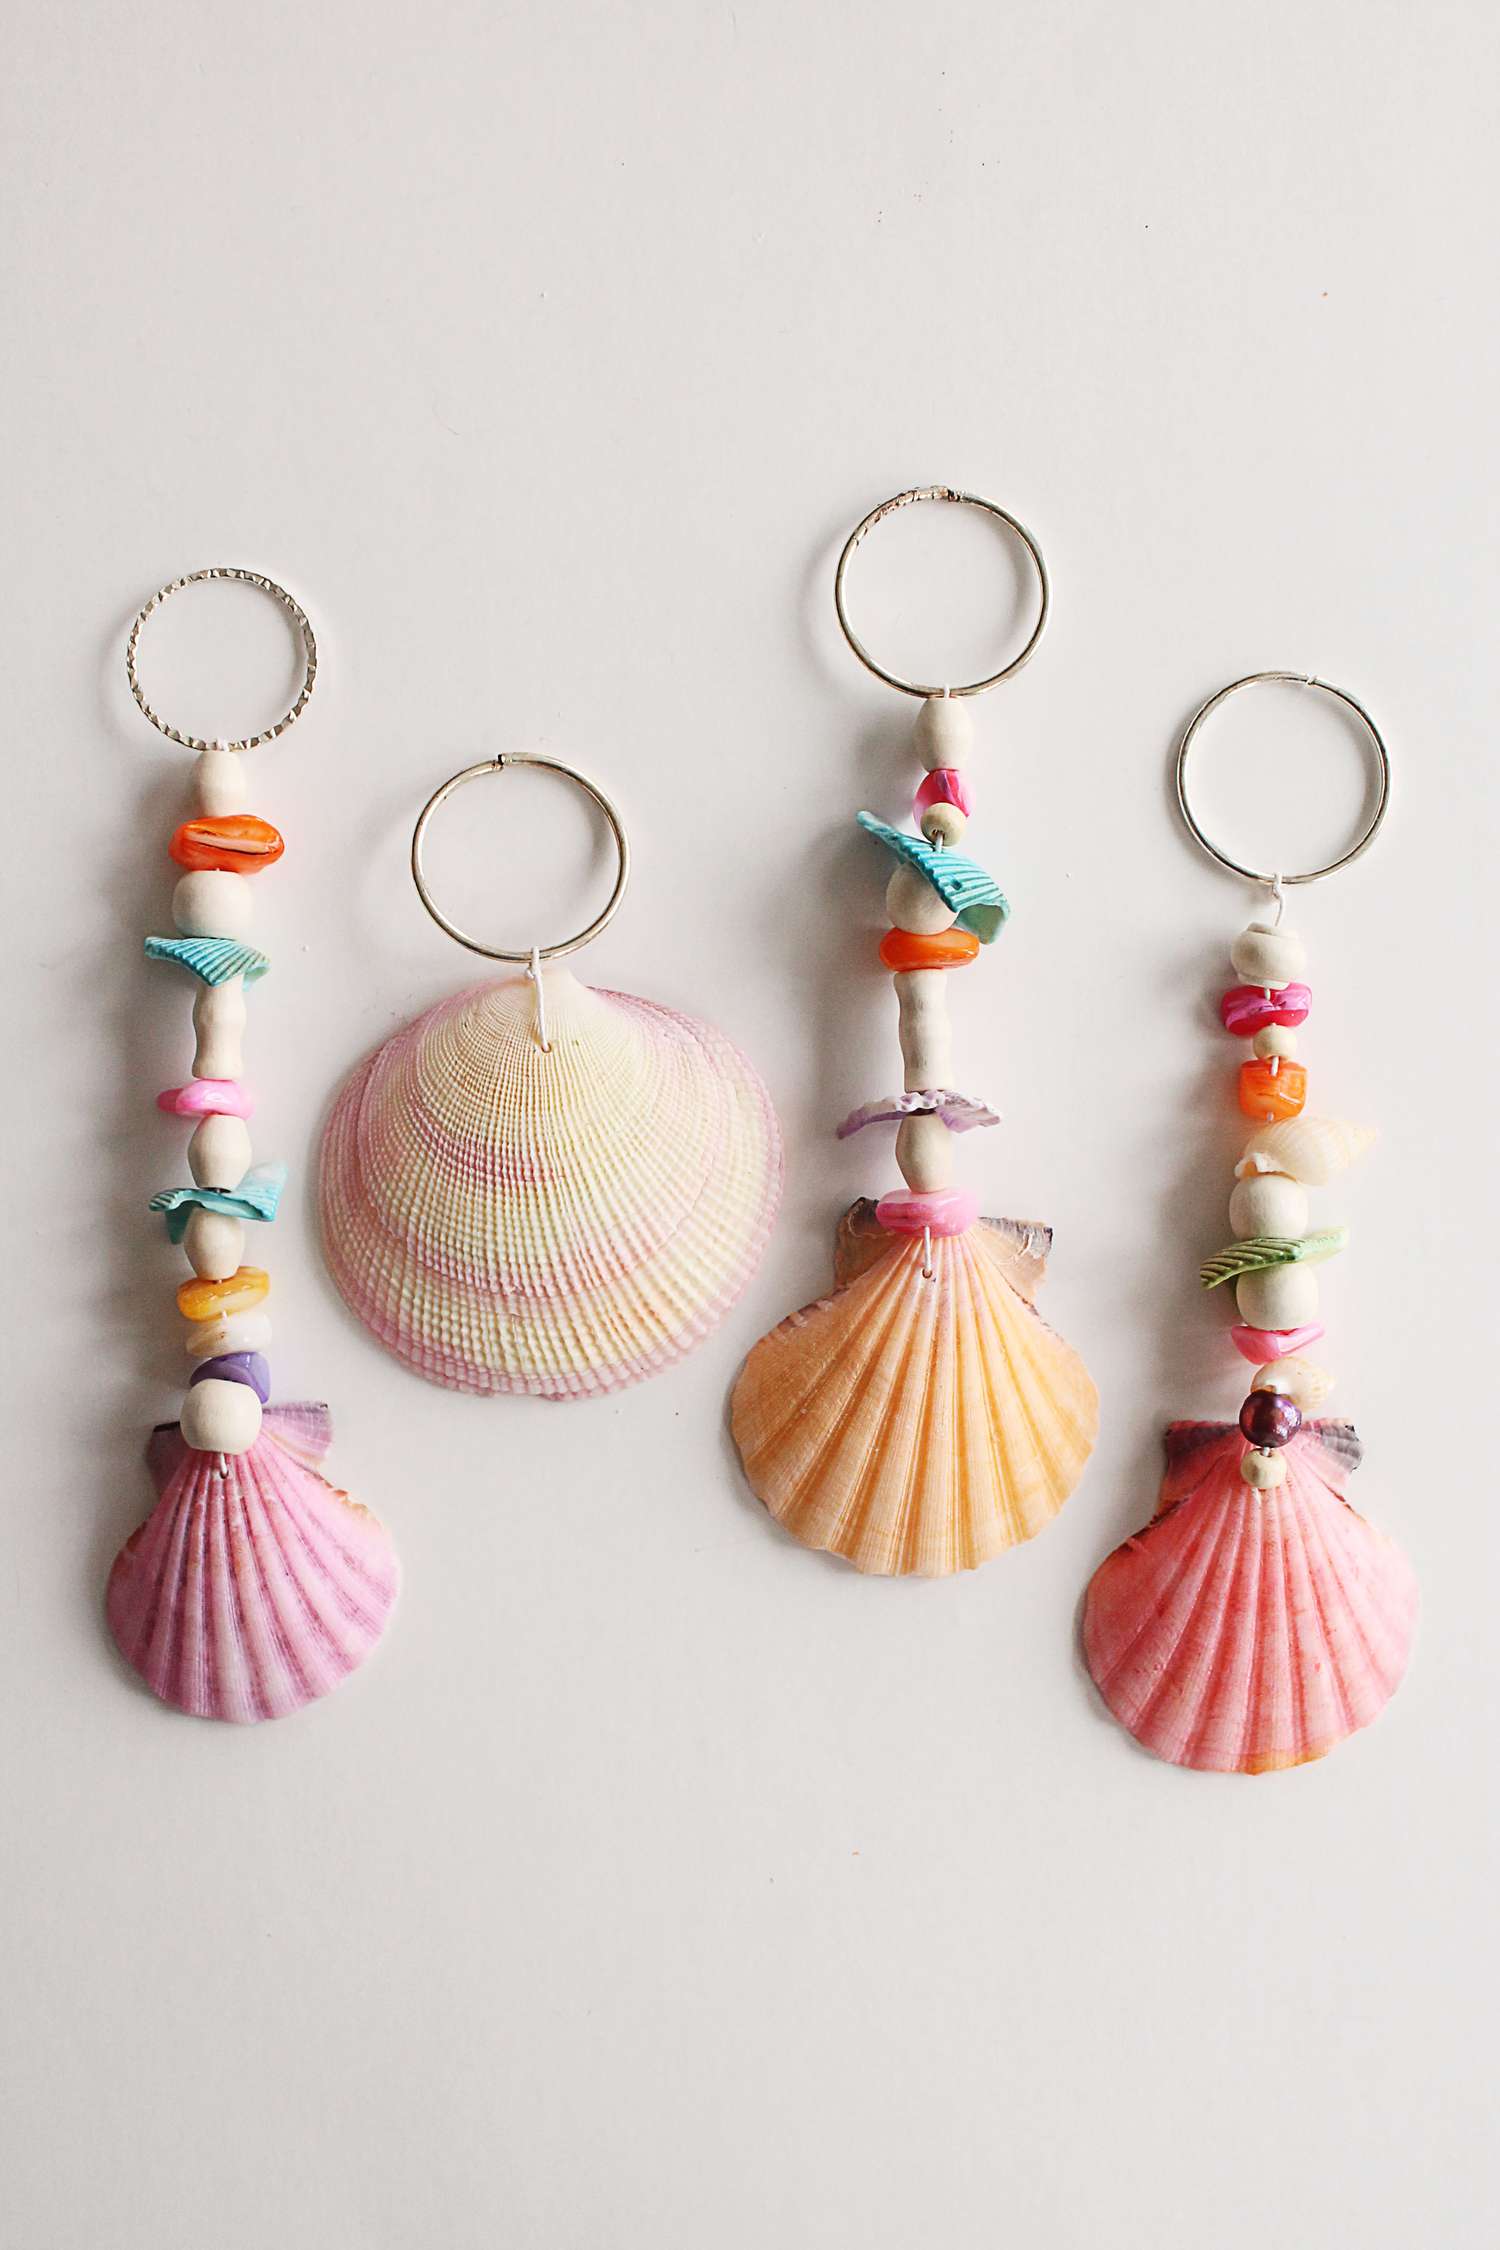 35 Seashell Crafts So Your Summer Memories Will Last a Lifetime